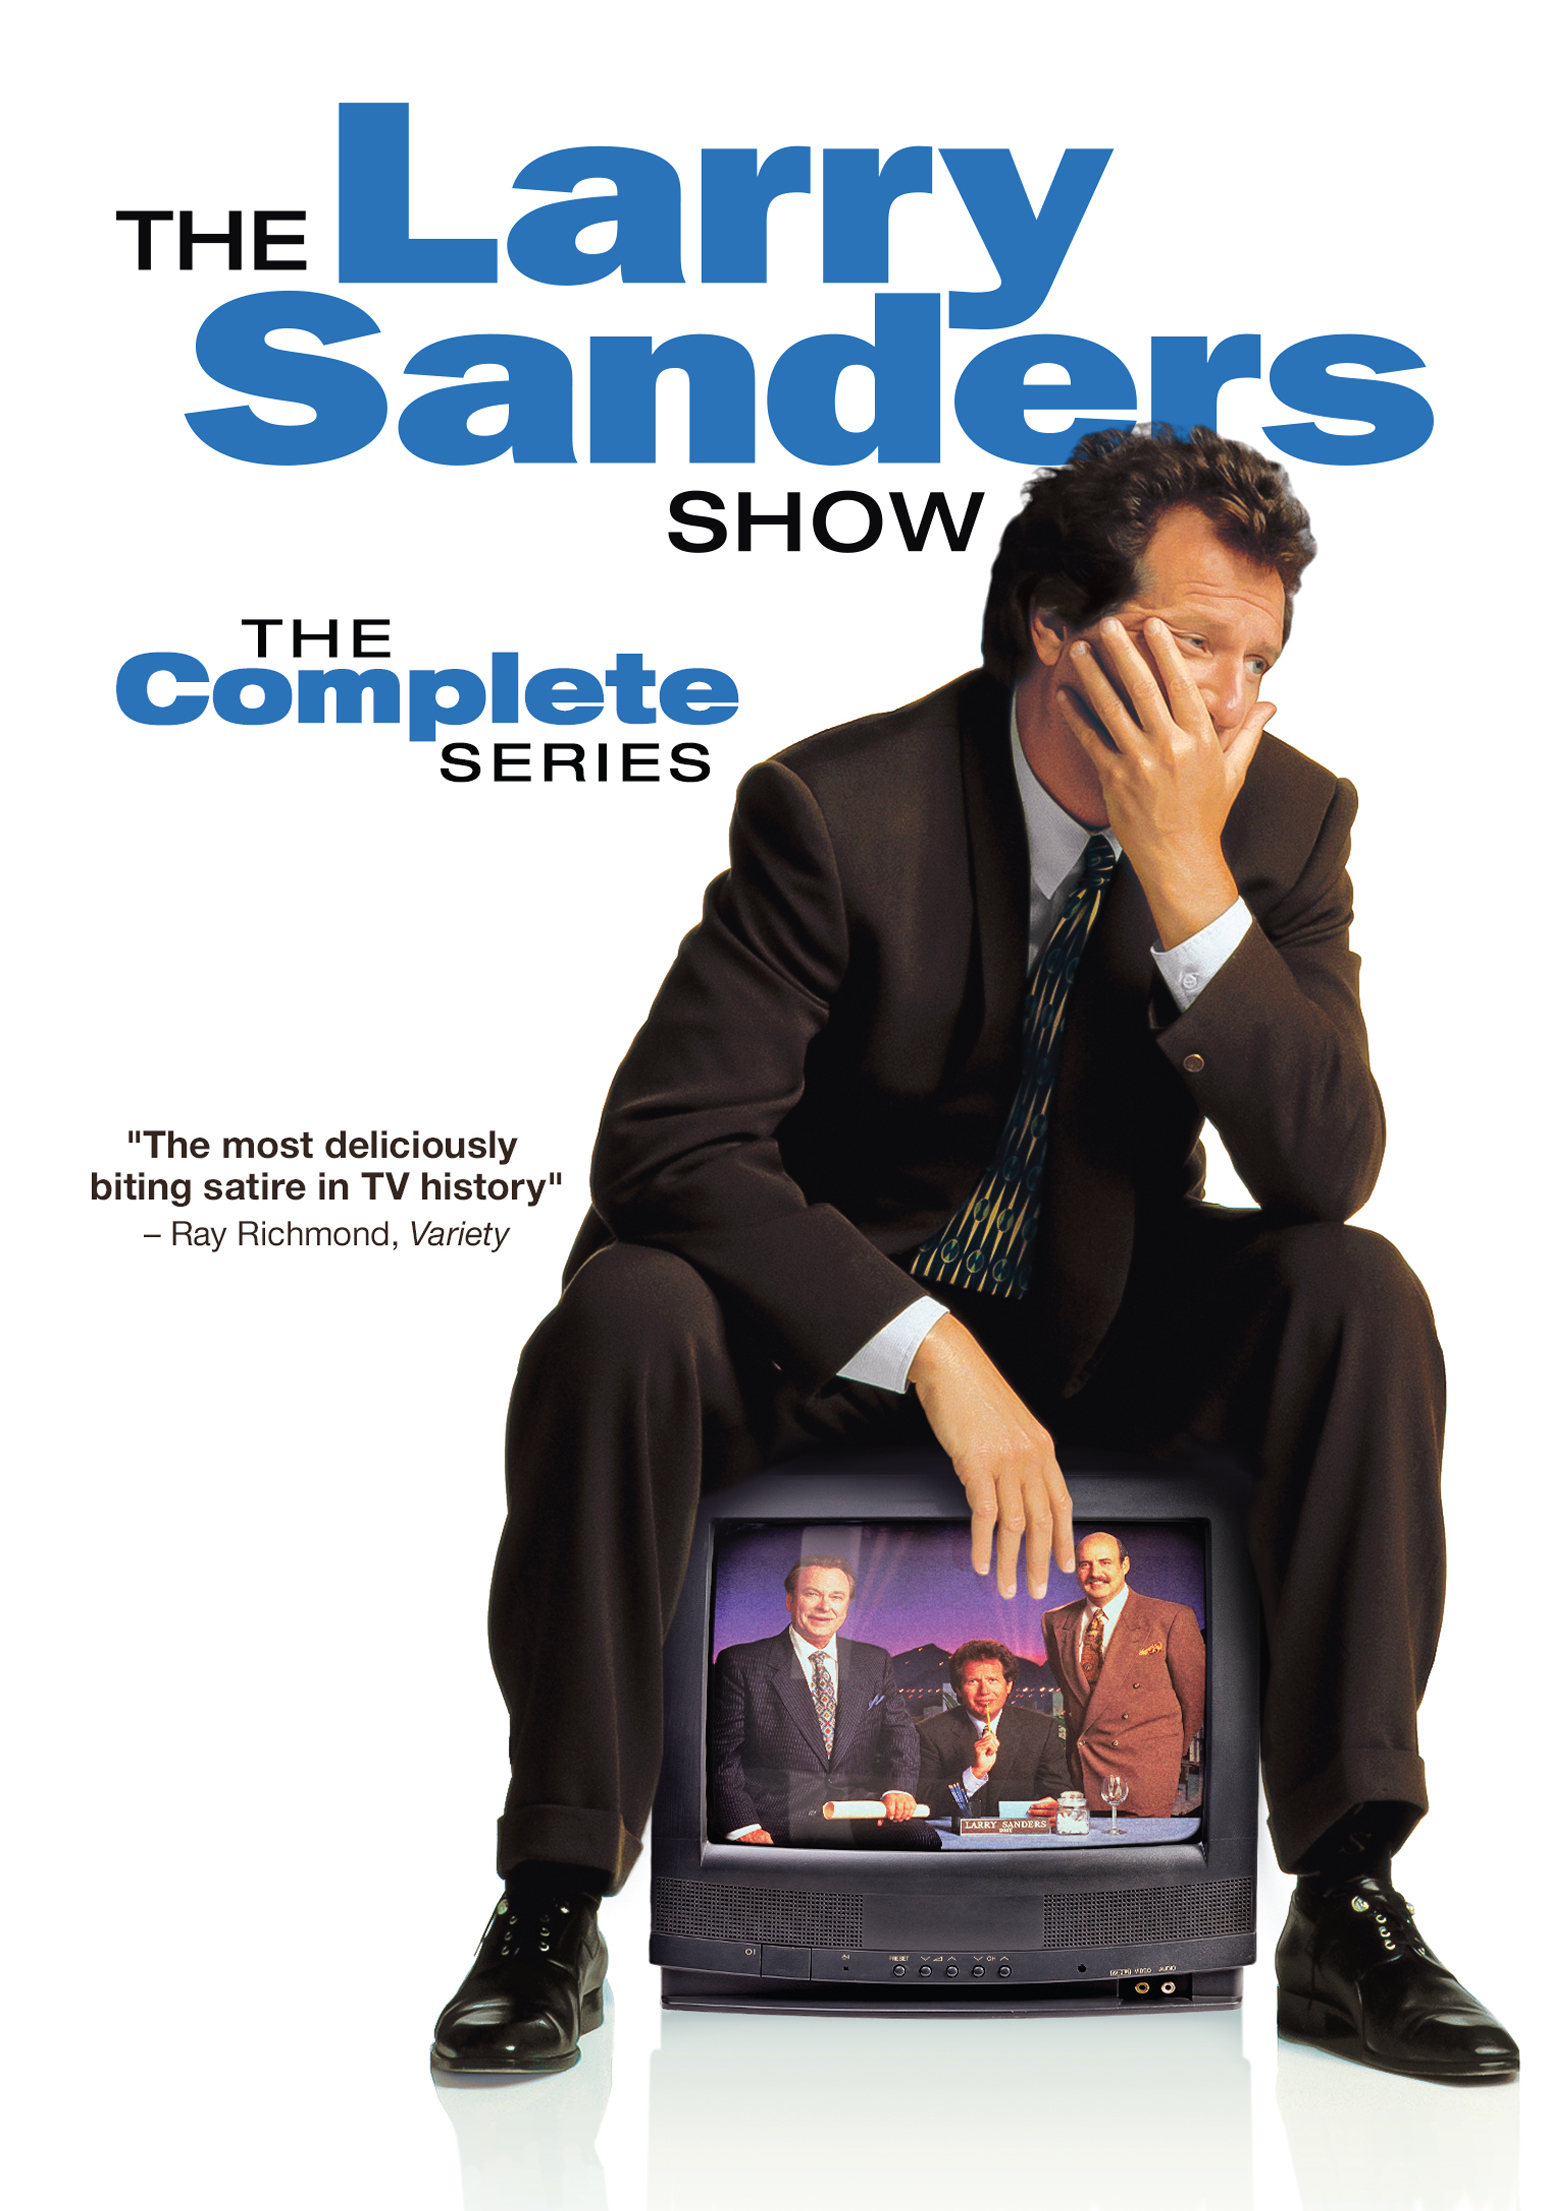 The Larry Sanders Show: The Complete Series [9 Discs] [DVD]